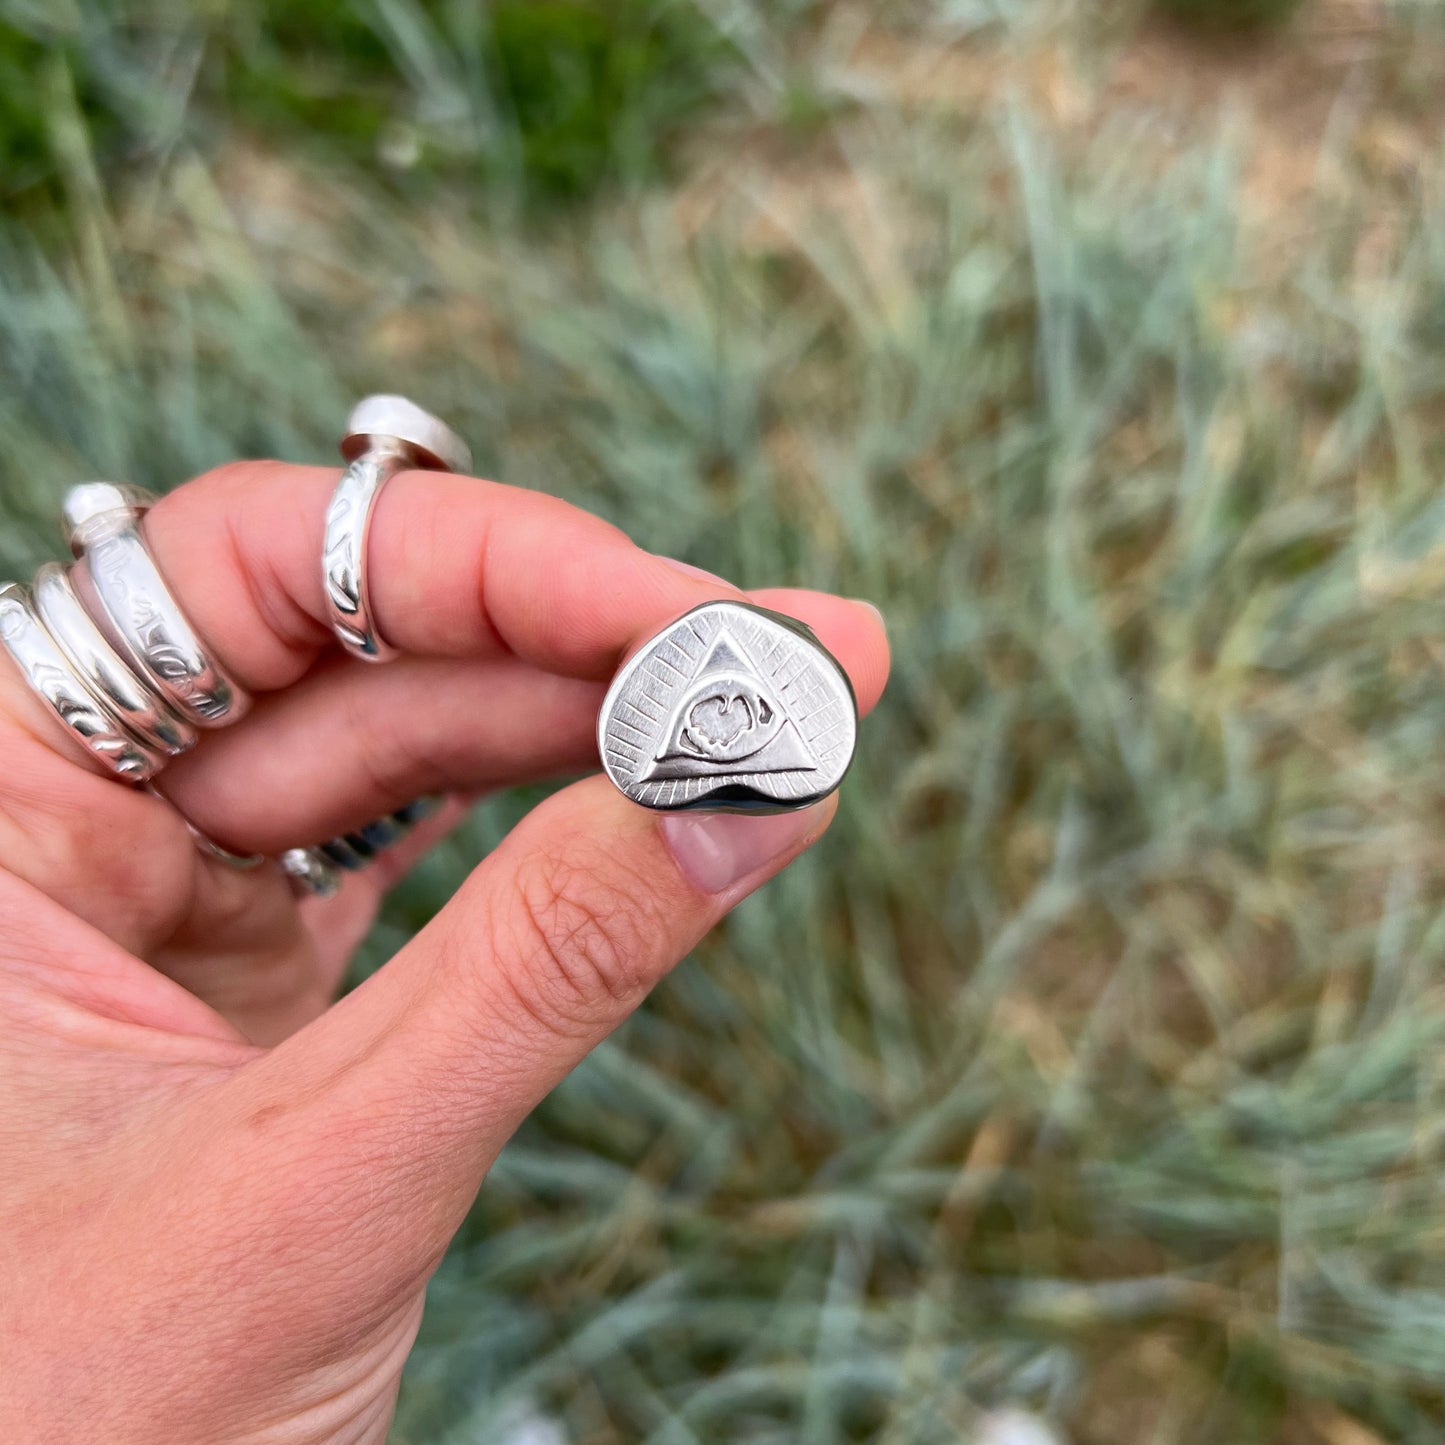 "Hearts or spades" signet ring